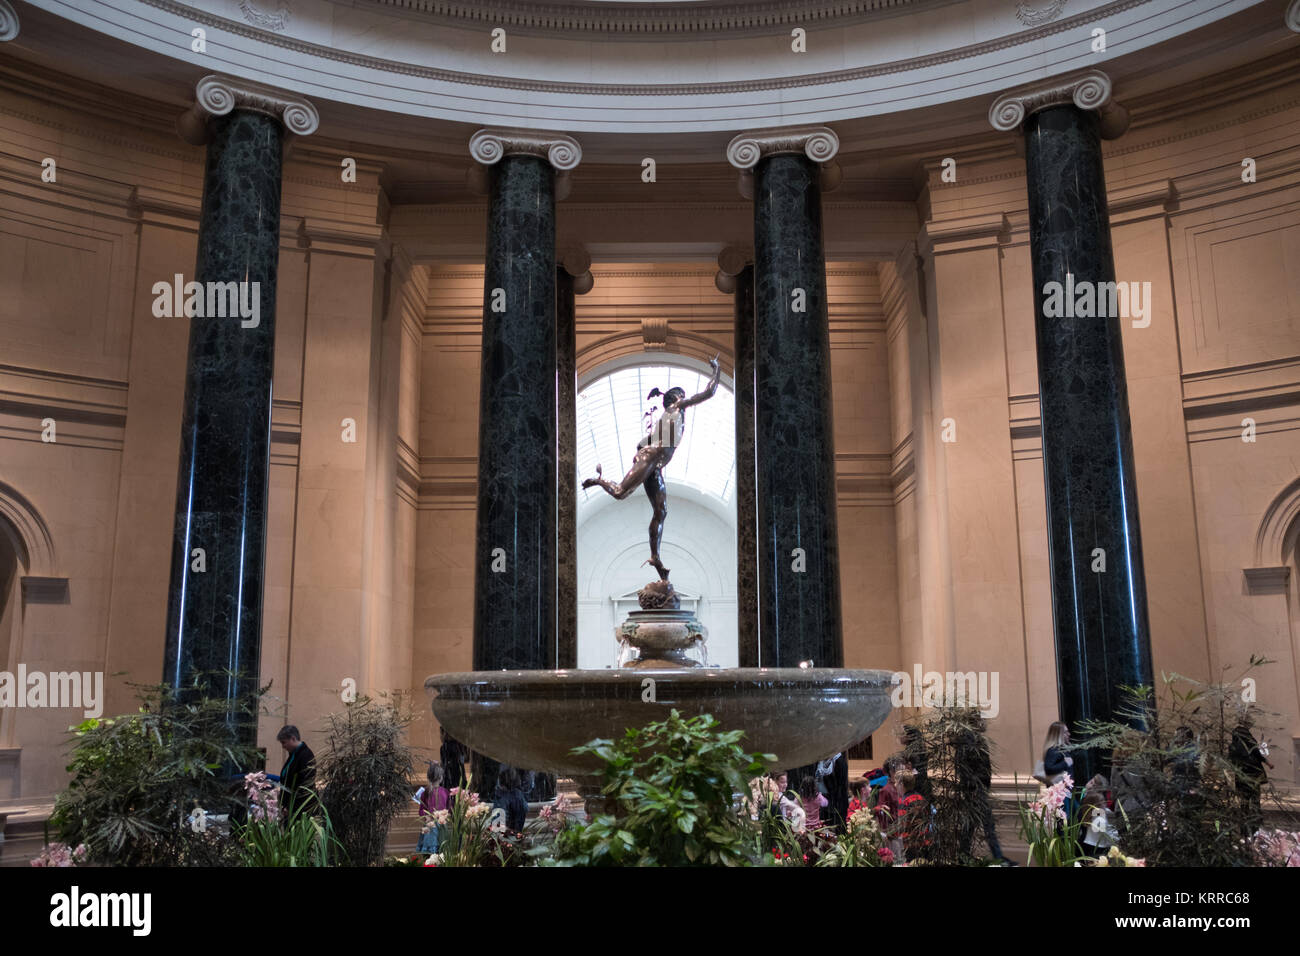 WASHINGTON DC, United States — A fountain in the main rotunda of the National Gallery of Art in Washington DC. The National Gallery of Art is renowned for its collection of European and American art, offering a comprehensive timeline of artistic development from the Middle Ages to the present day. Its esteemed status as a free public museum underscores its national significance and commitment to art education. Stock Photo